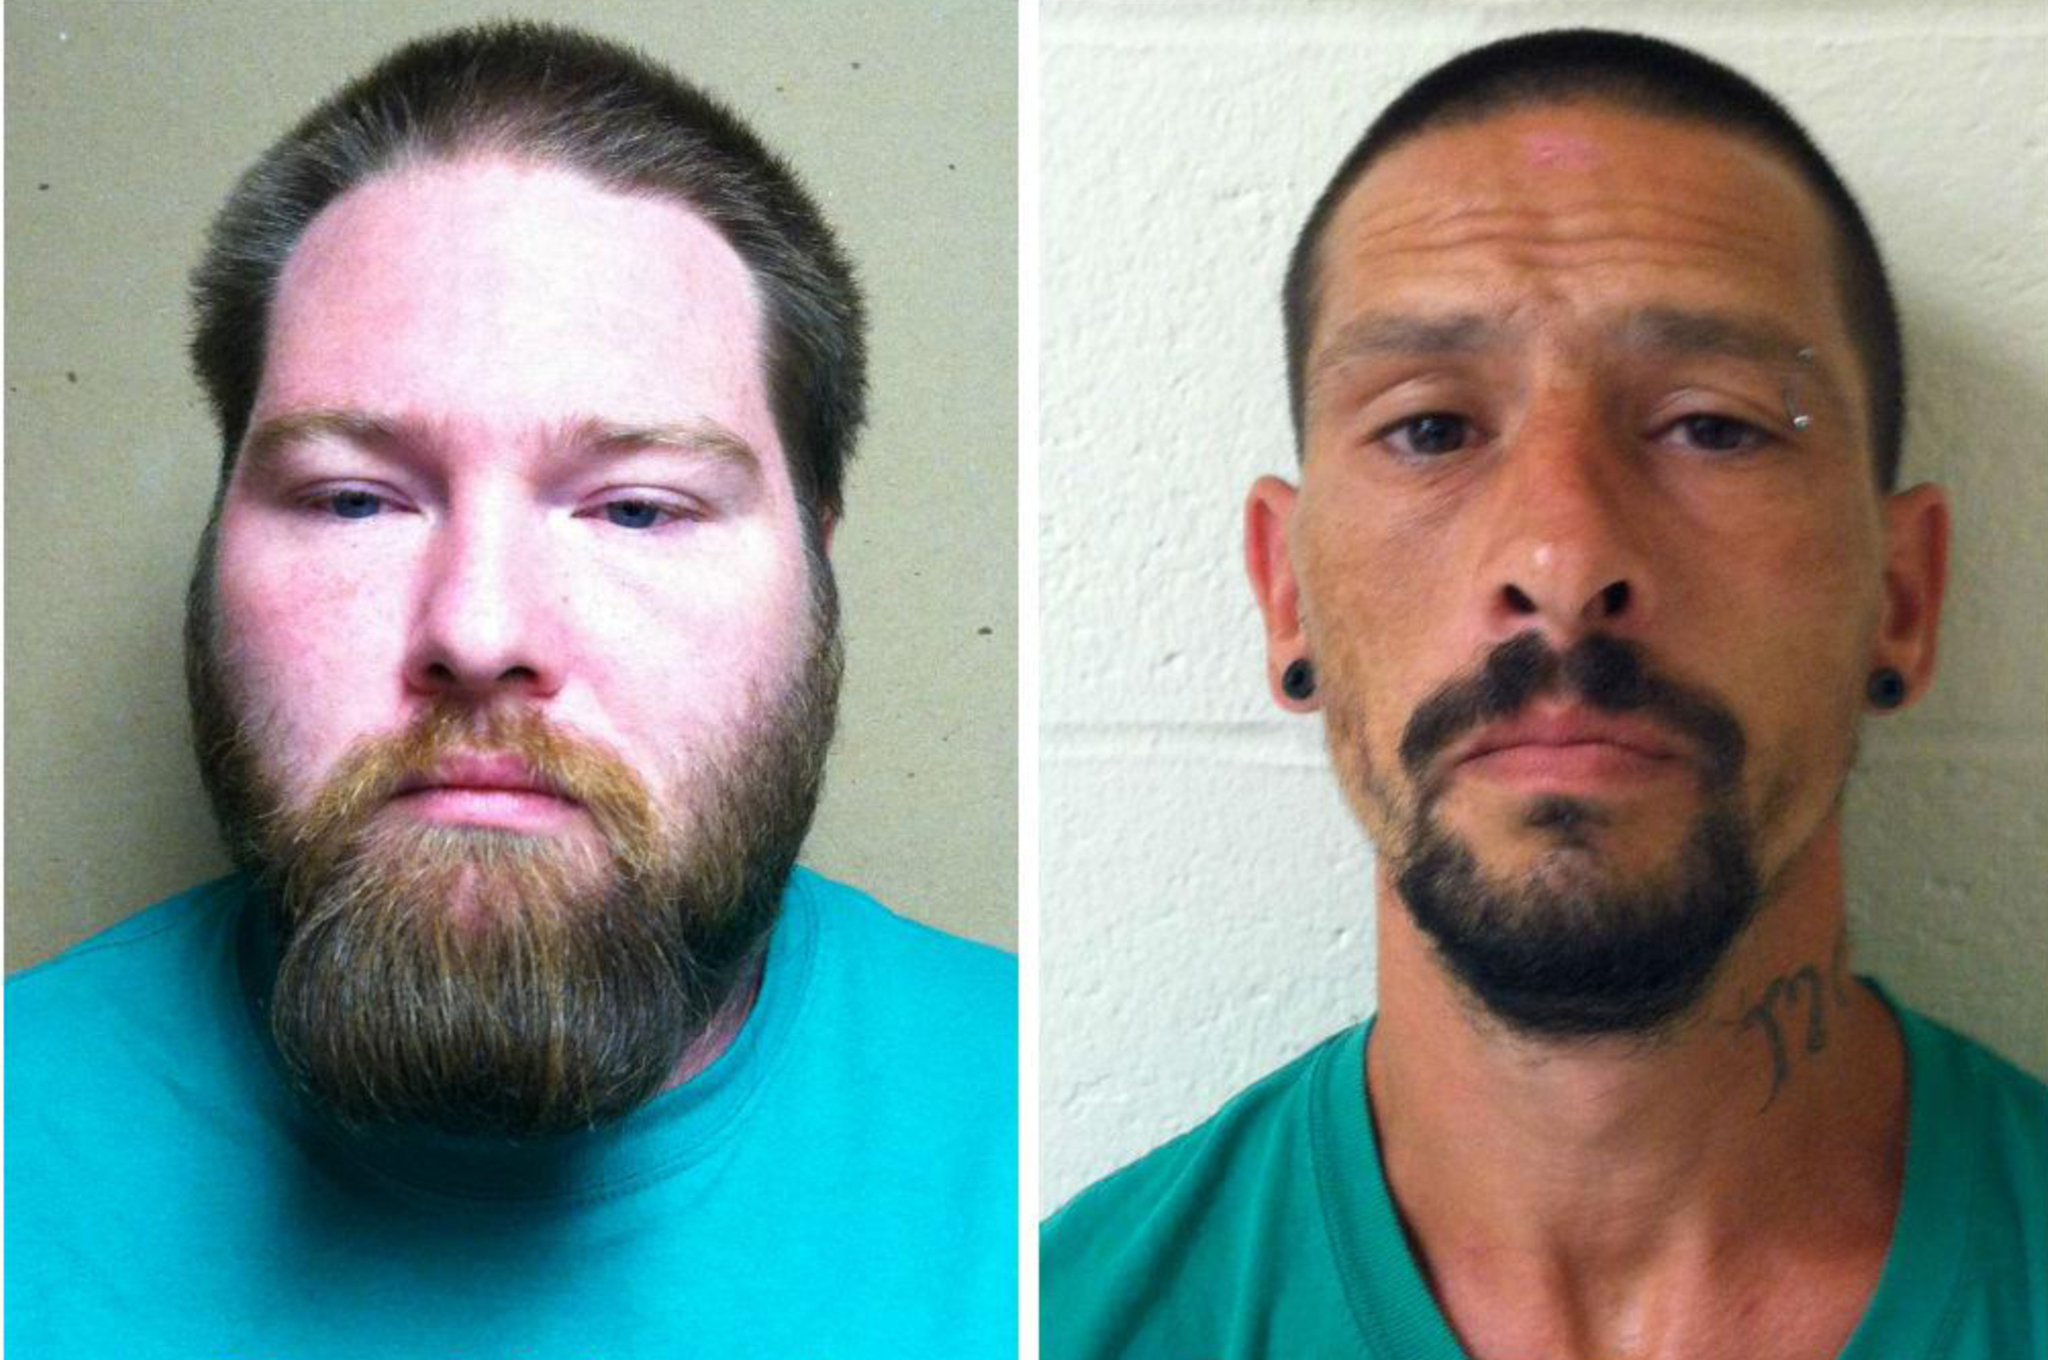 Paul Hurst, left, and Cary Edwards. A Maryland judge has ordered two men held without bond on charges of attacking a housemate and trying to forcibly remove a tattoo from his arm